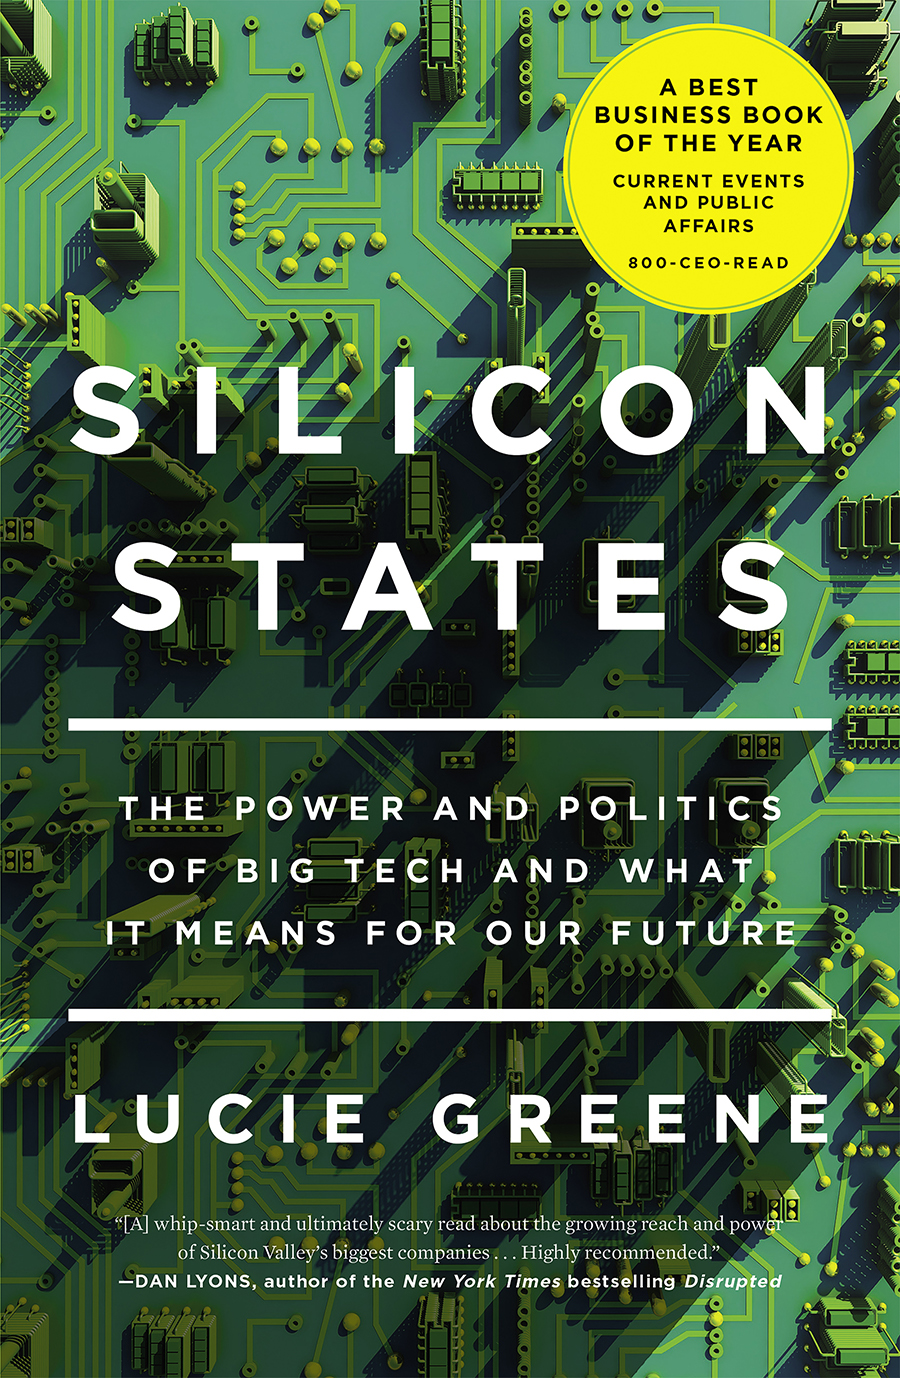 Silicon-States-The-Power-and-Politics-of-Big-Tech-and-What-It-Means-for-Our-Future